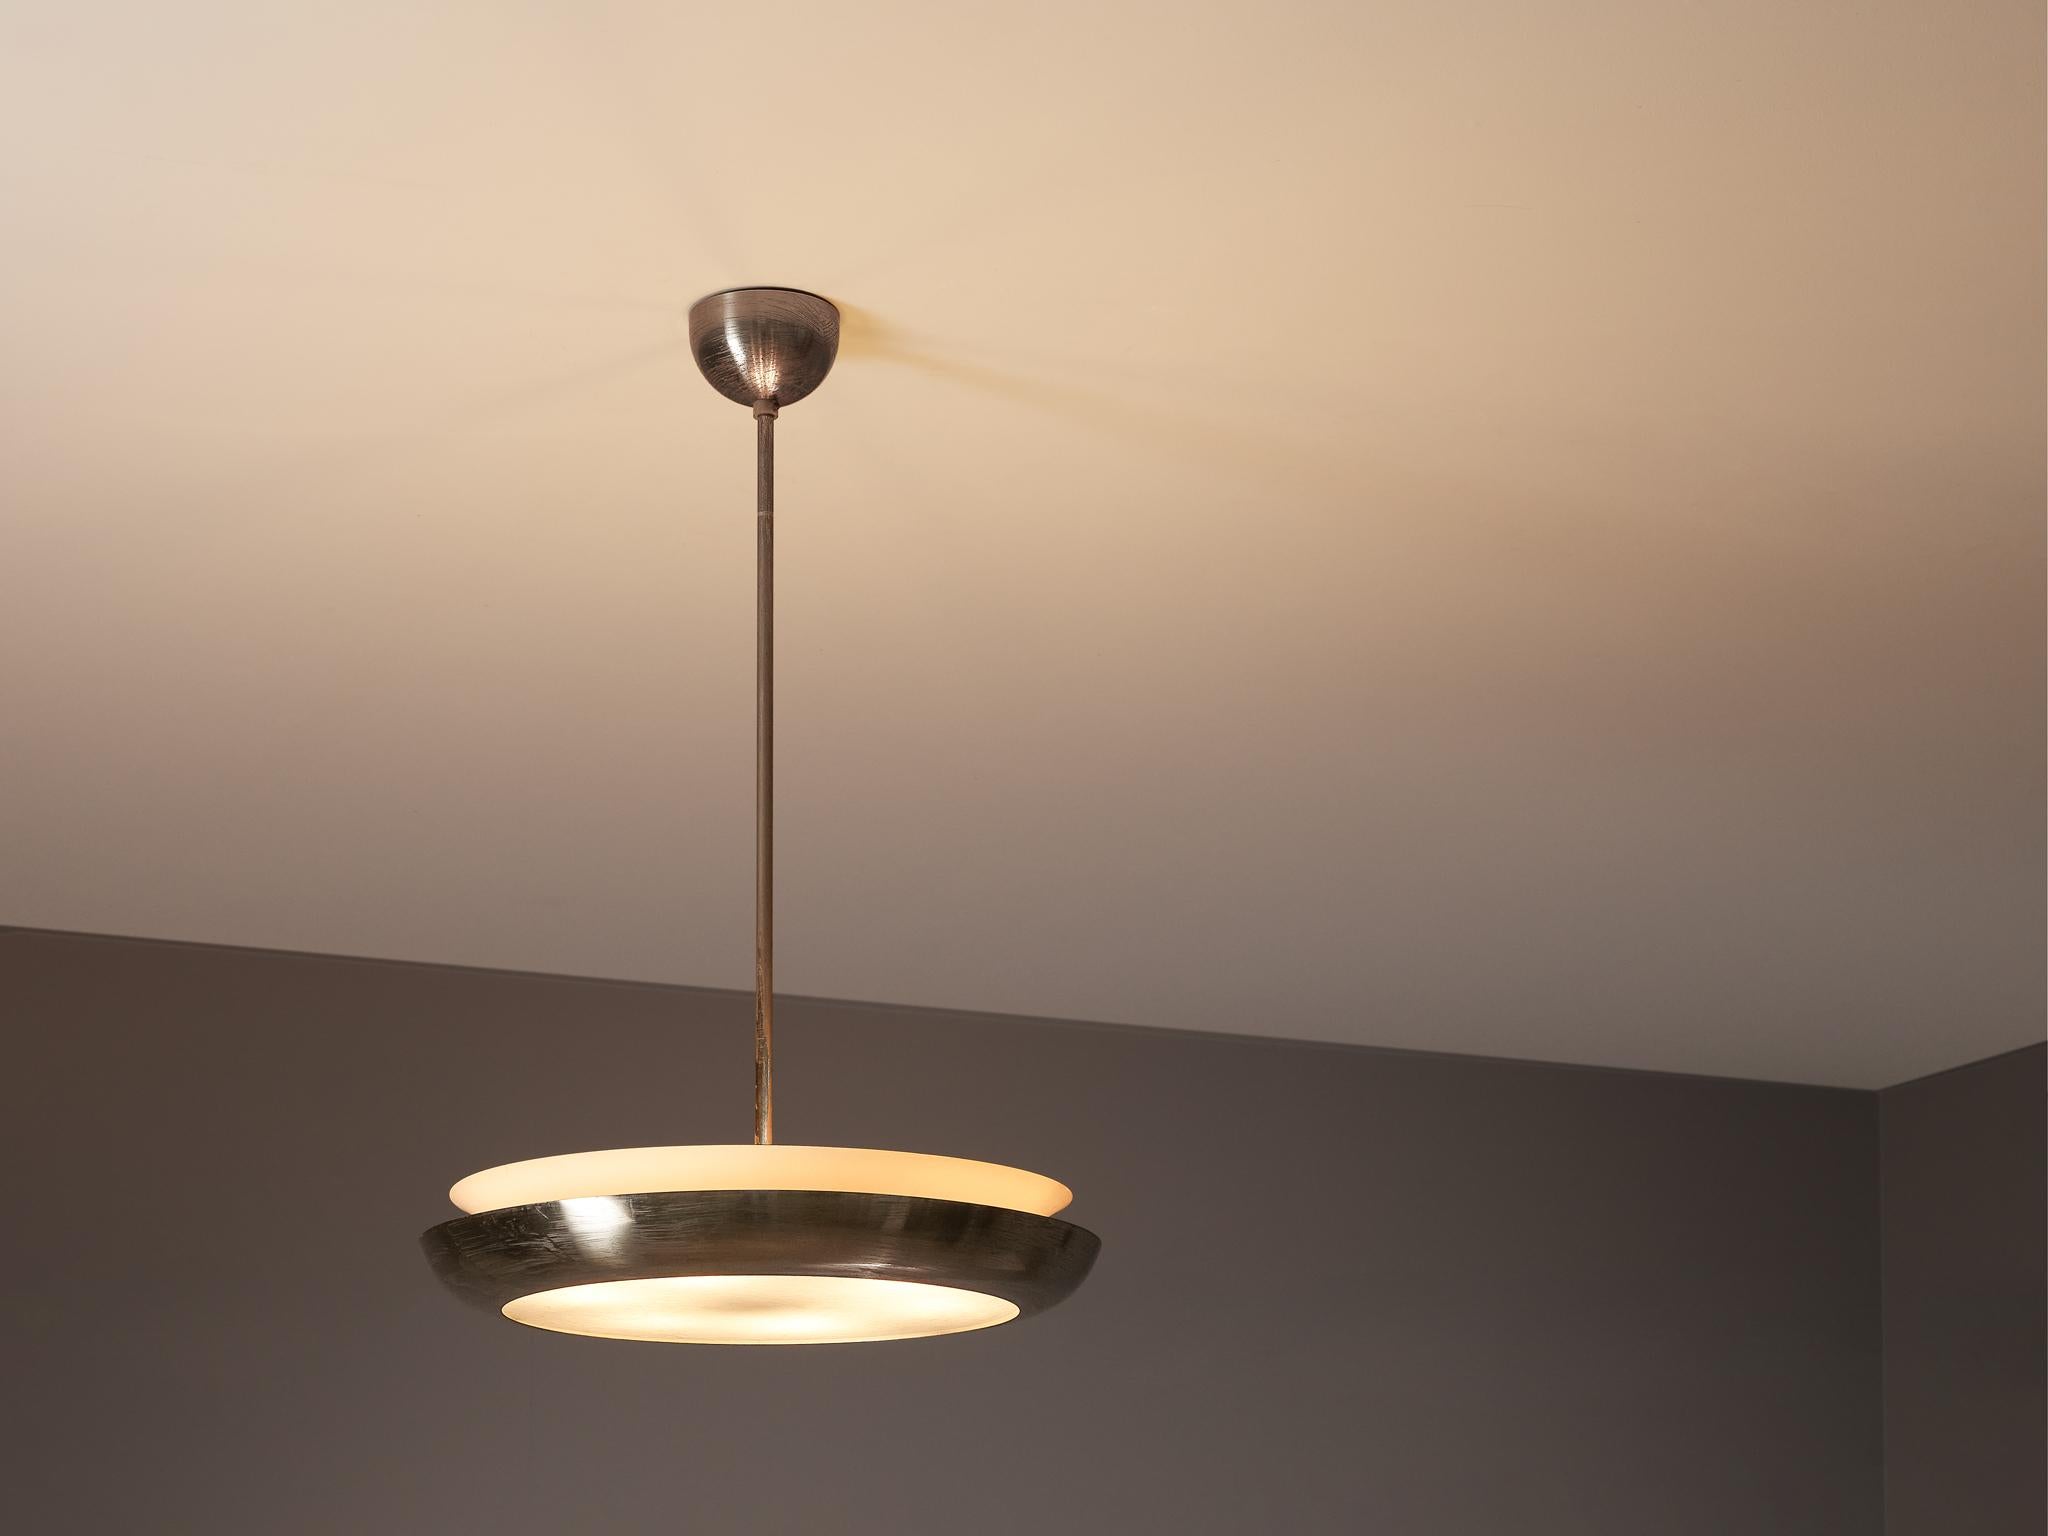 Josef Hurka for Napako, 'Ufo' pendant, metal, glass, Czech Republic, 1940s

Josef Hurka designed this pendant for Napako. The pendant has a bowl shaped shade executed in metal. A matte diffuser creates an atmospheric, soft light partition and